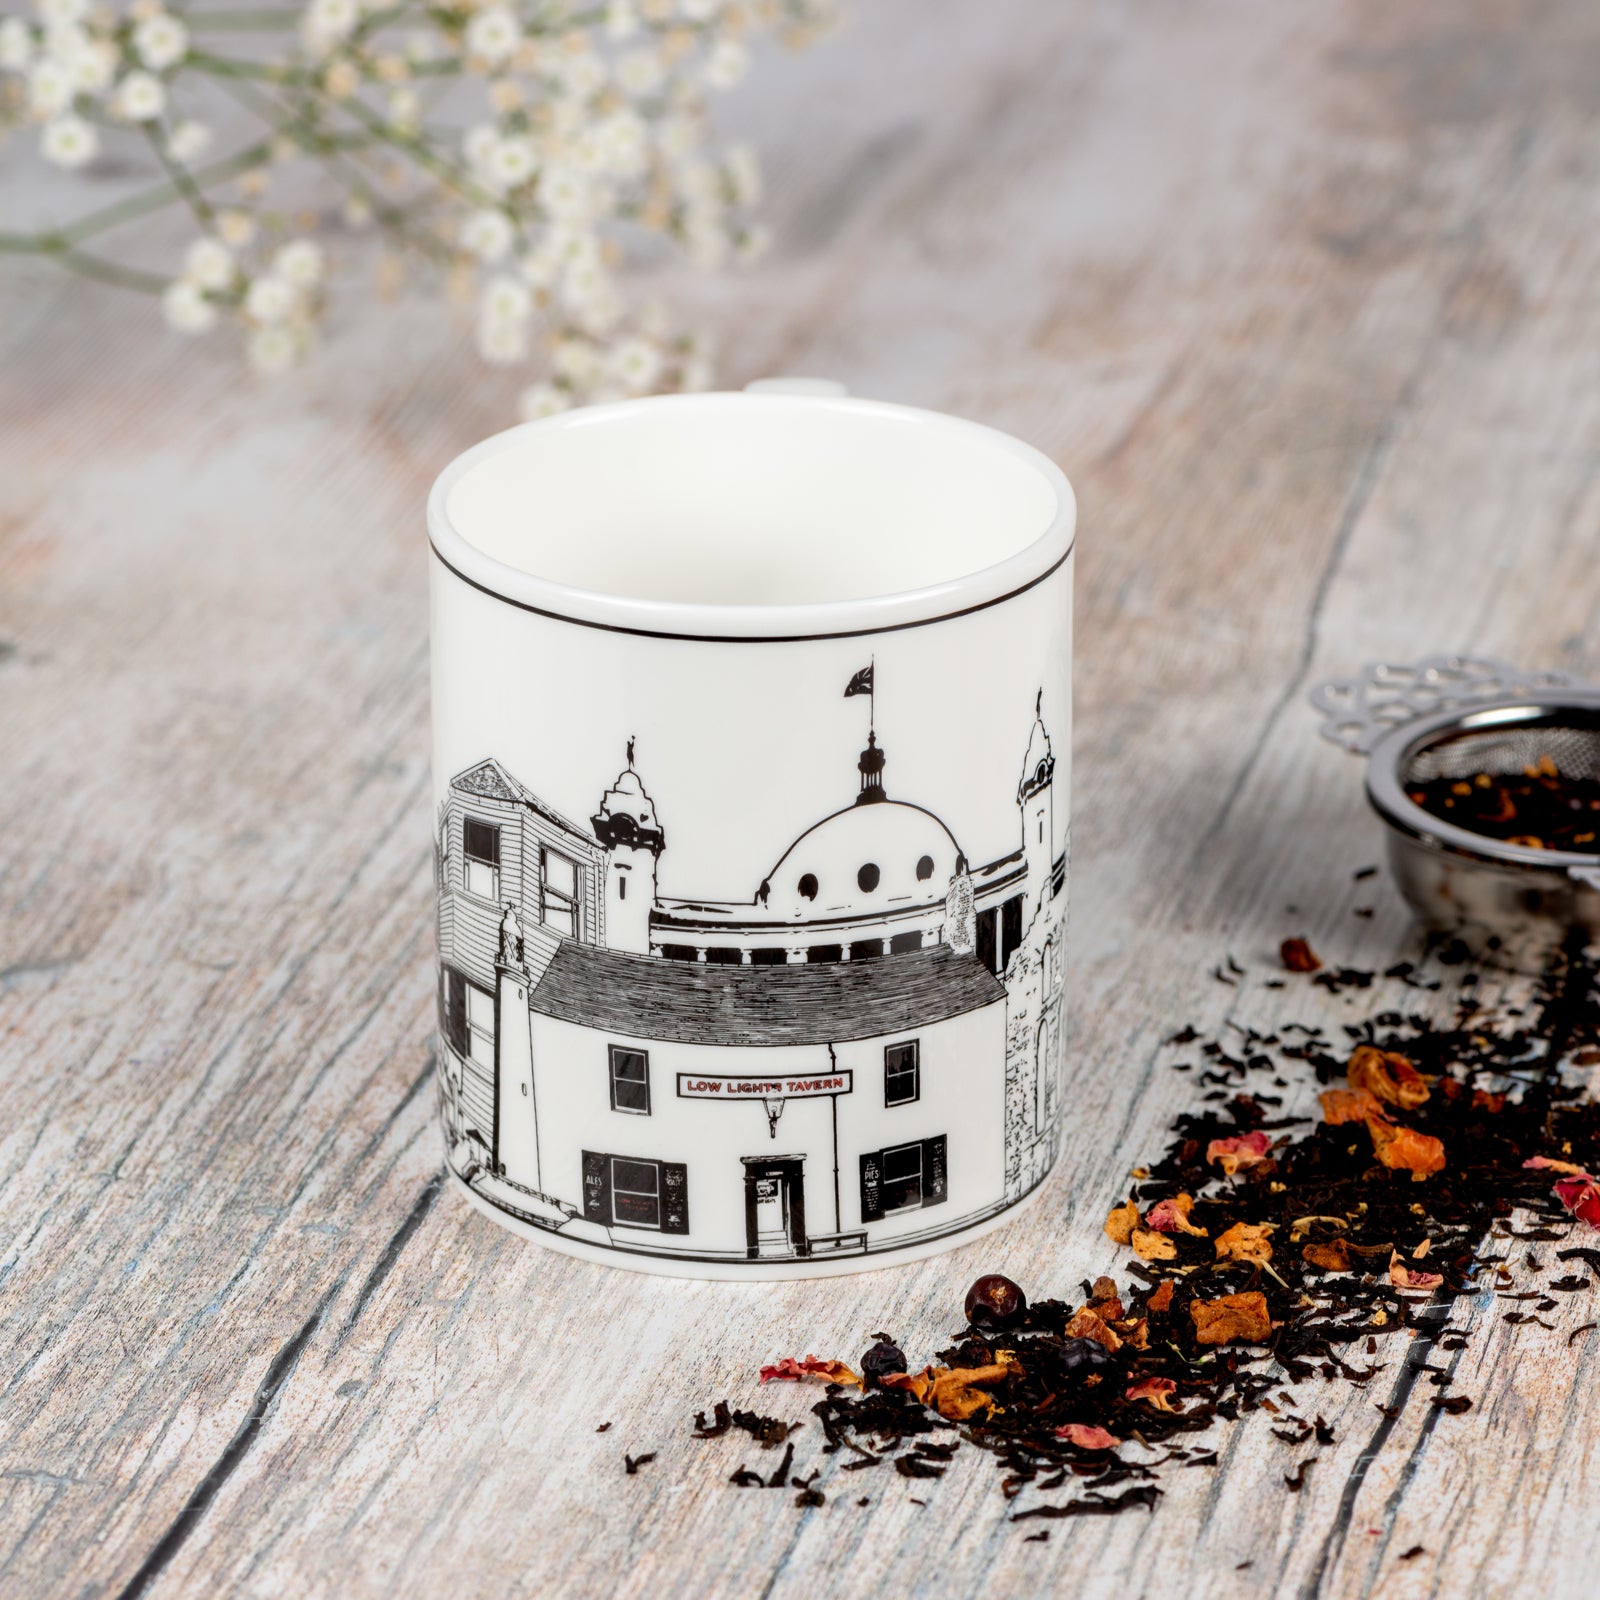 Fine china mug featuring landmarks from Tynemouth, Cullercoats, Whitley Bay and North Shields. With a silver tea strainer and scattered tea leaves.